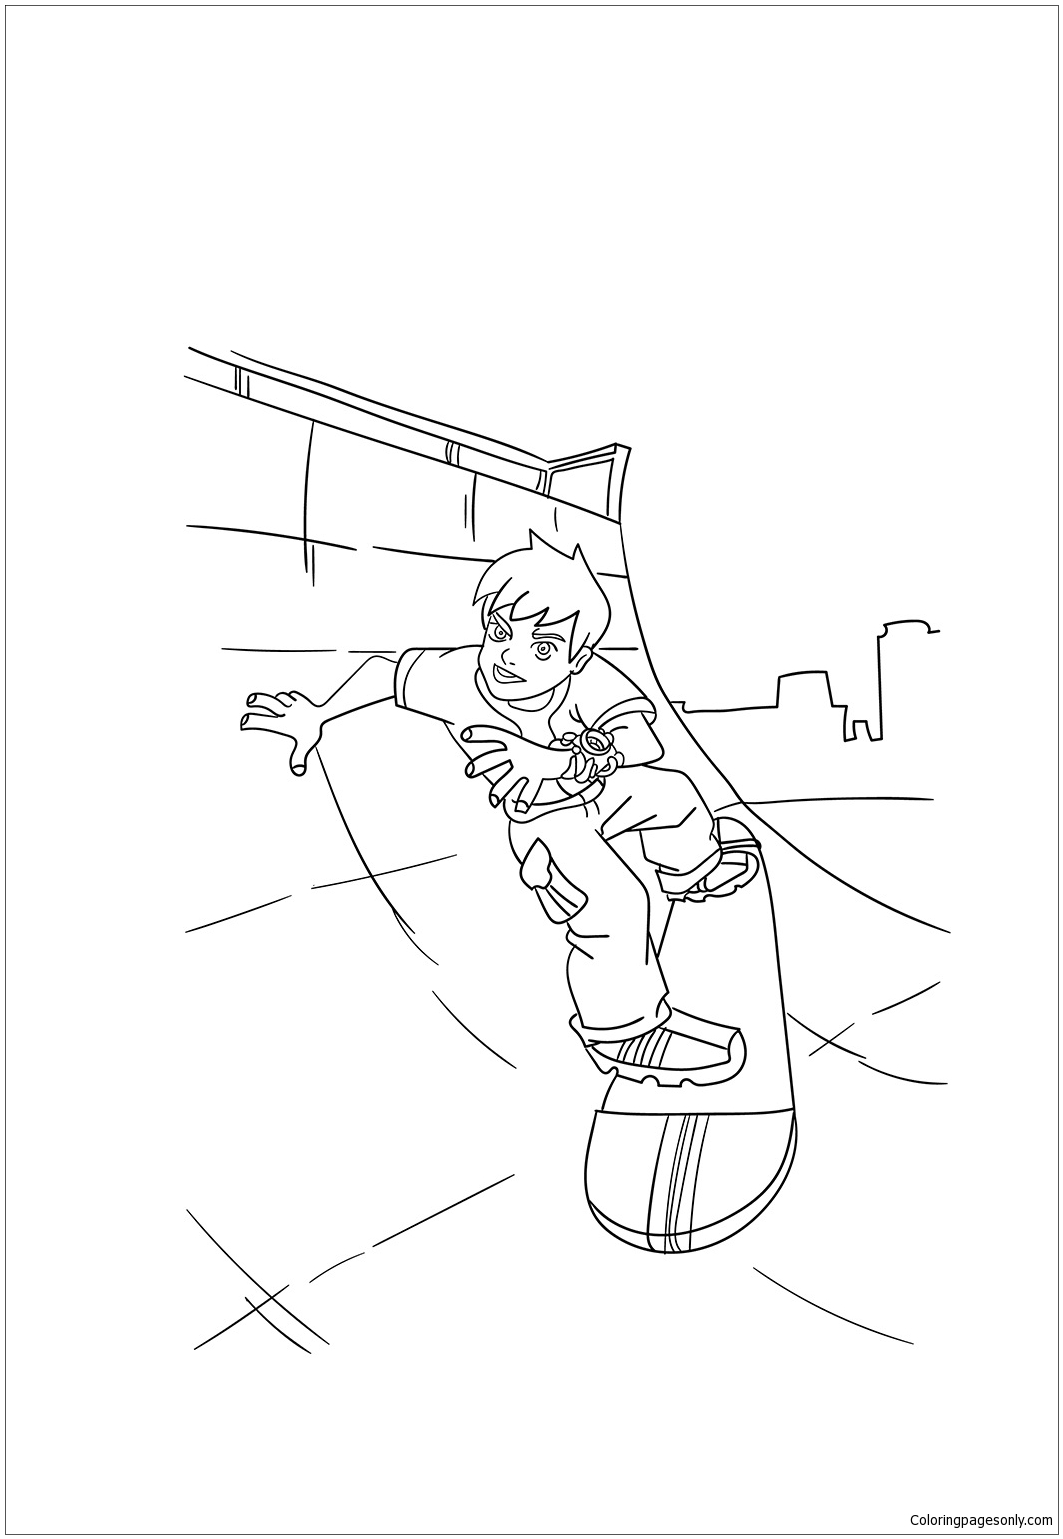 The Ben 10 Skating Coloring Pages